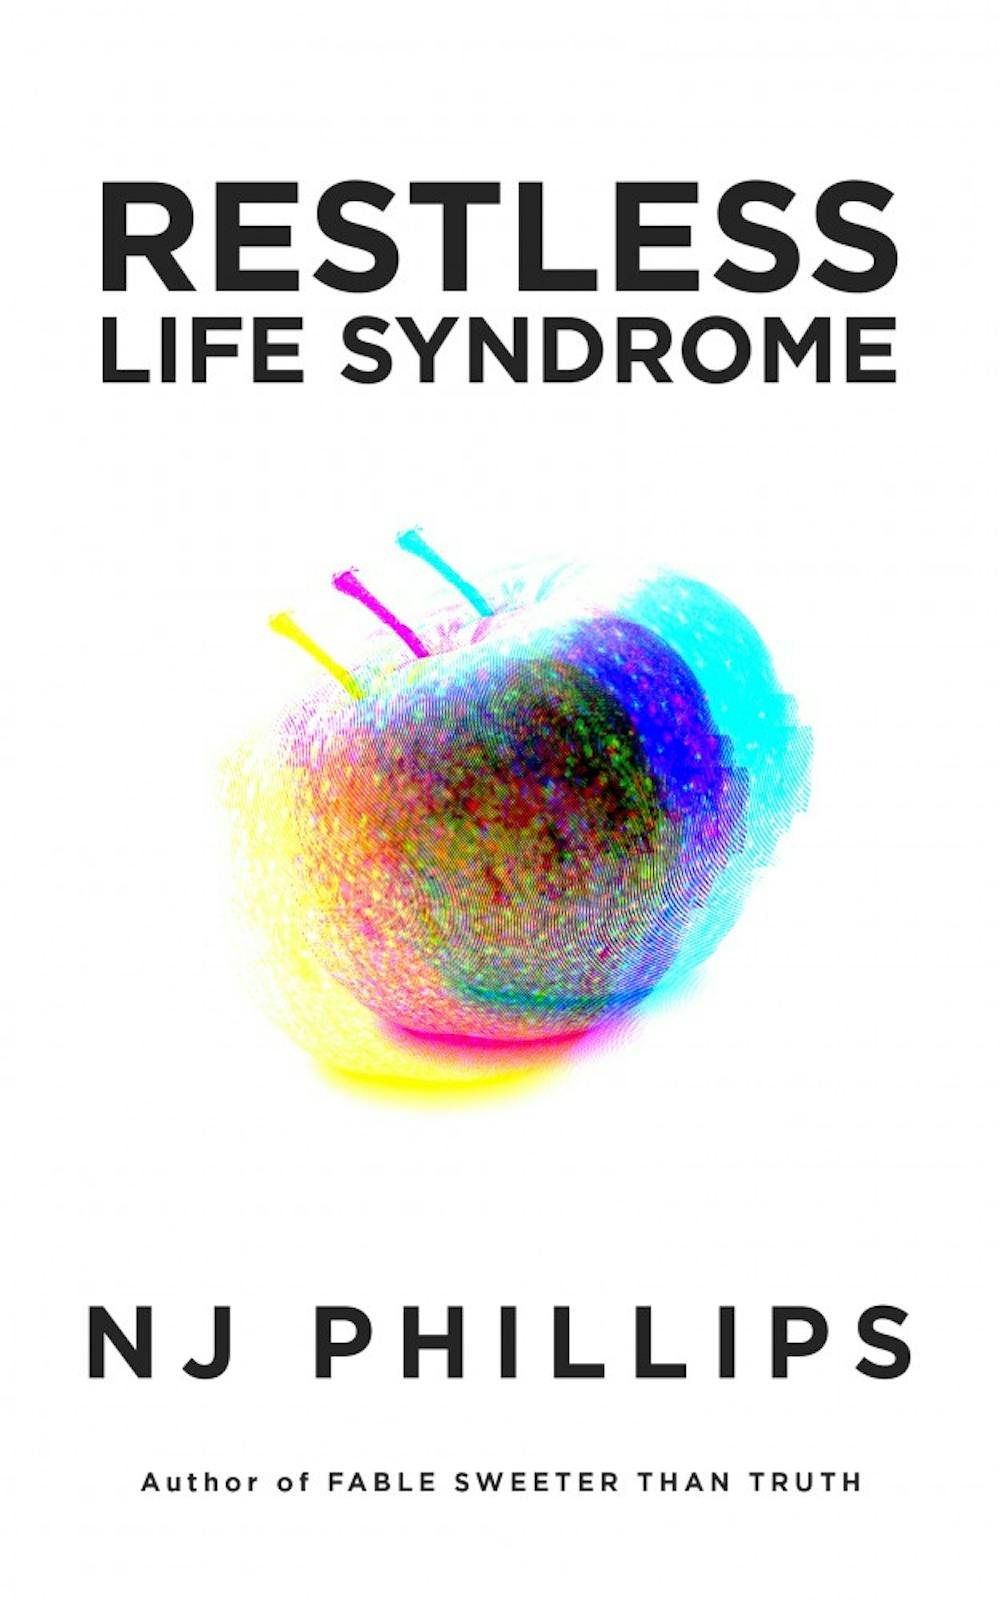 EMU graduate student publishes book "Restless Life Syndrome"